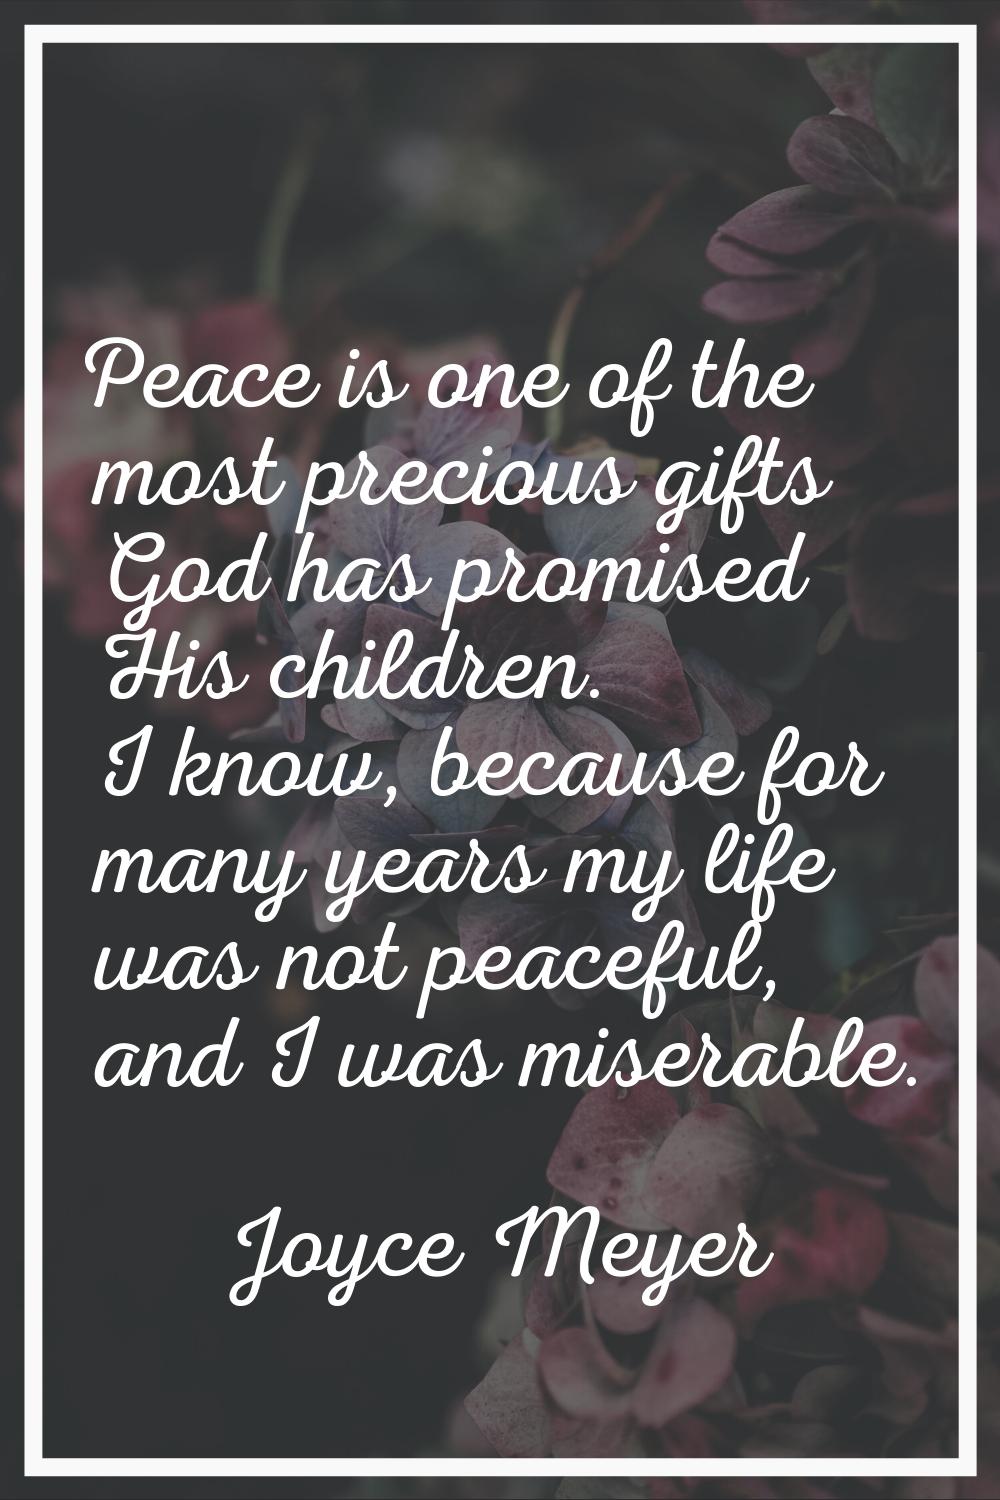 Peace is one of the most precious gifts God has promised His children. I know, because for many yea